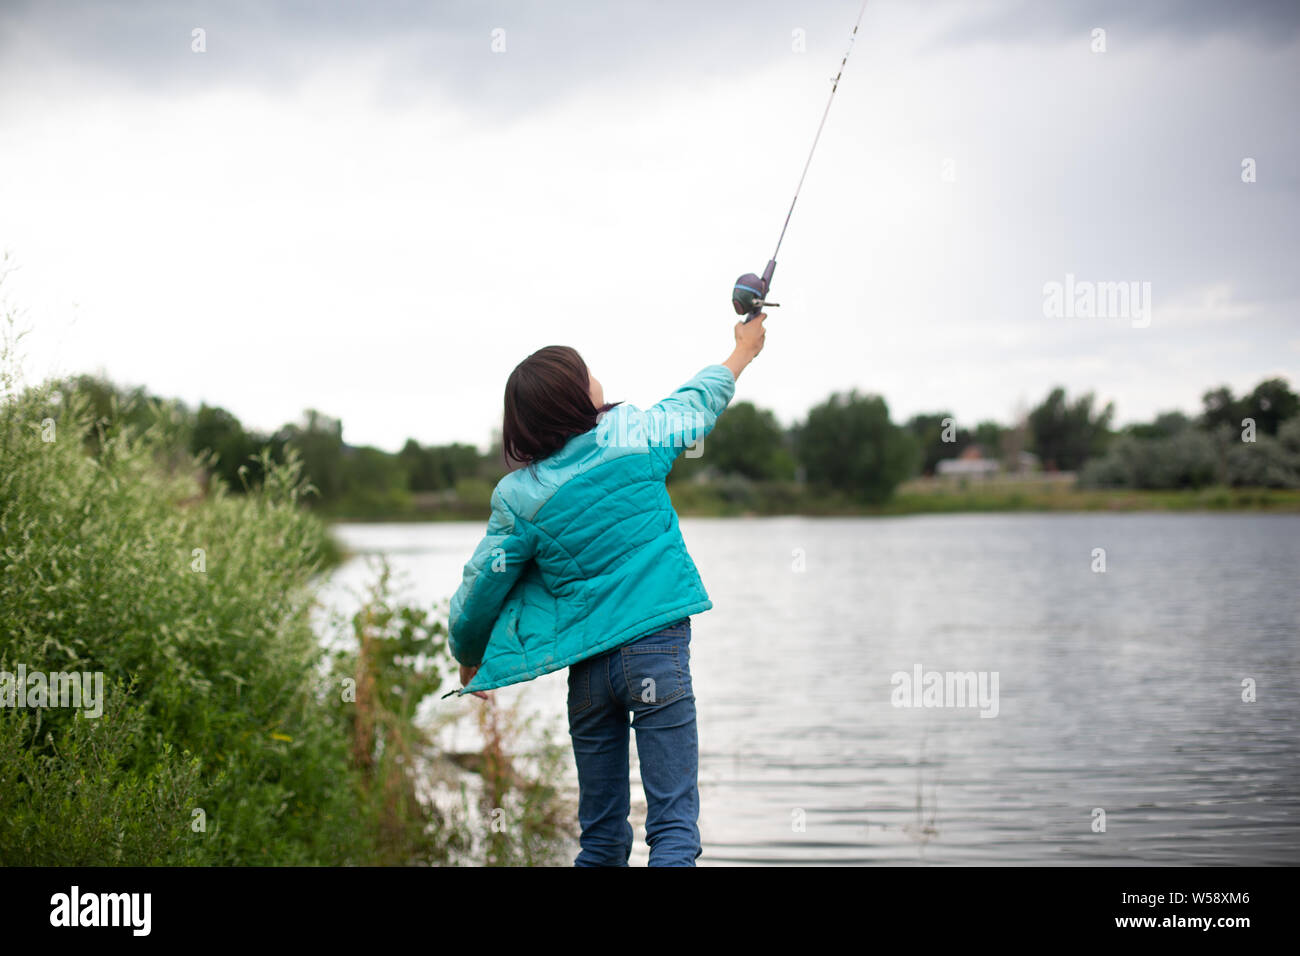 Girl casting fishing line over her head Stock Photo - Alamy